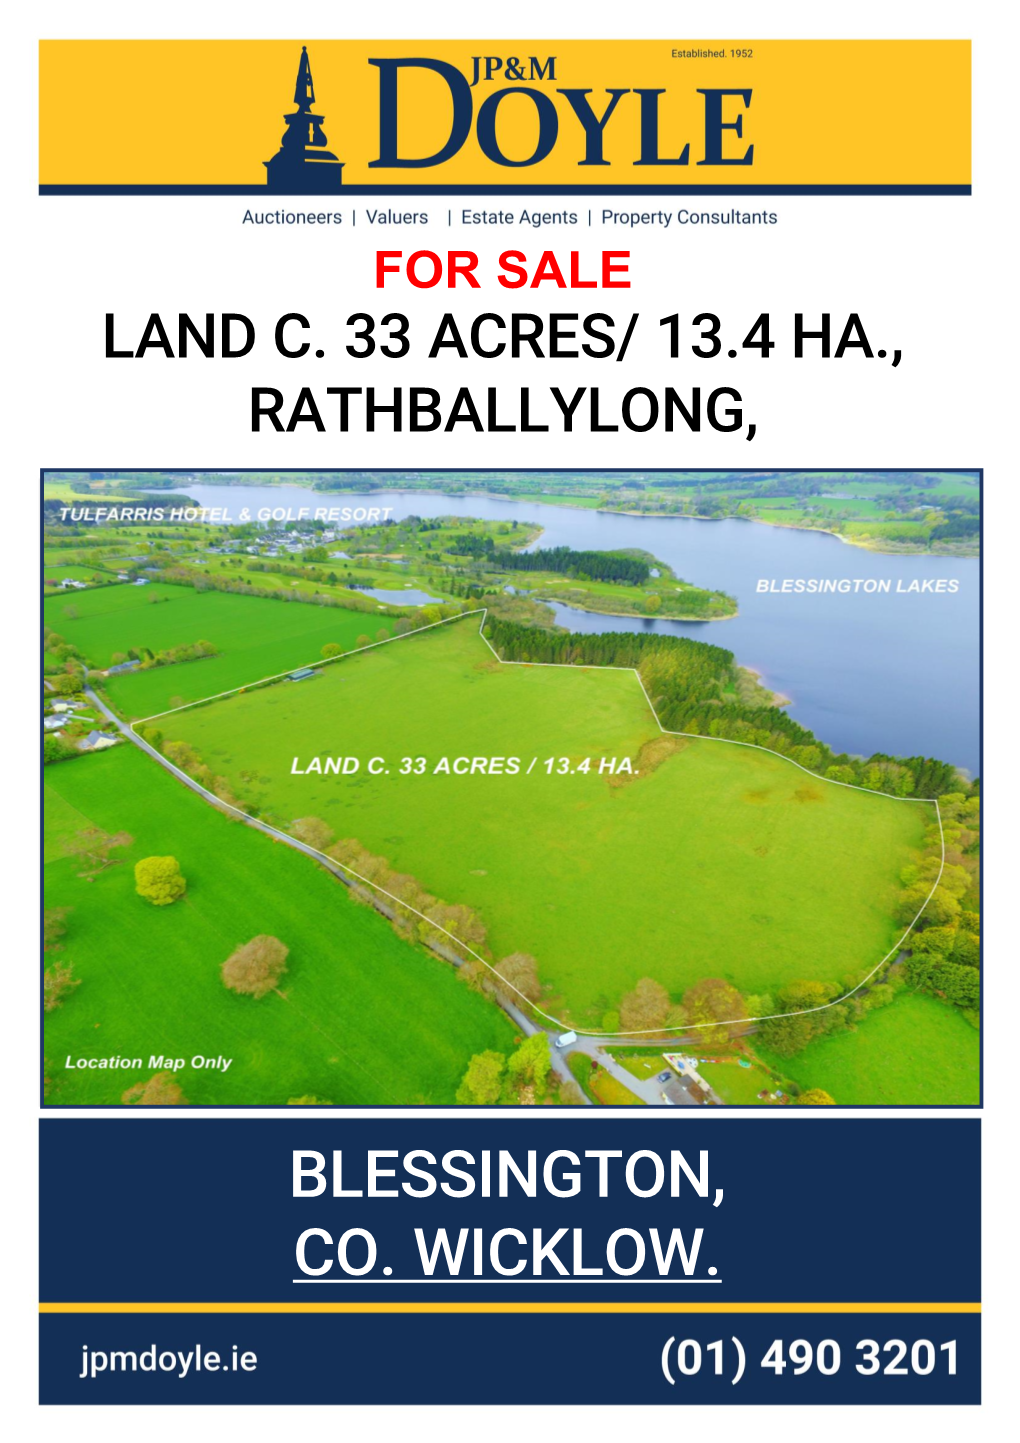 BLESSINGTON, CO. WICKLOW. LOCATION: Situated in This Most Picturesque Location Overlooking the Blessington Lakes and Adjoining Tulfarris Golf & Country Club, C